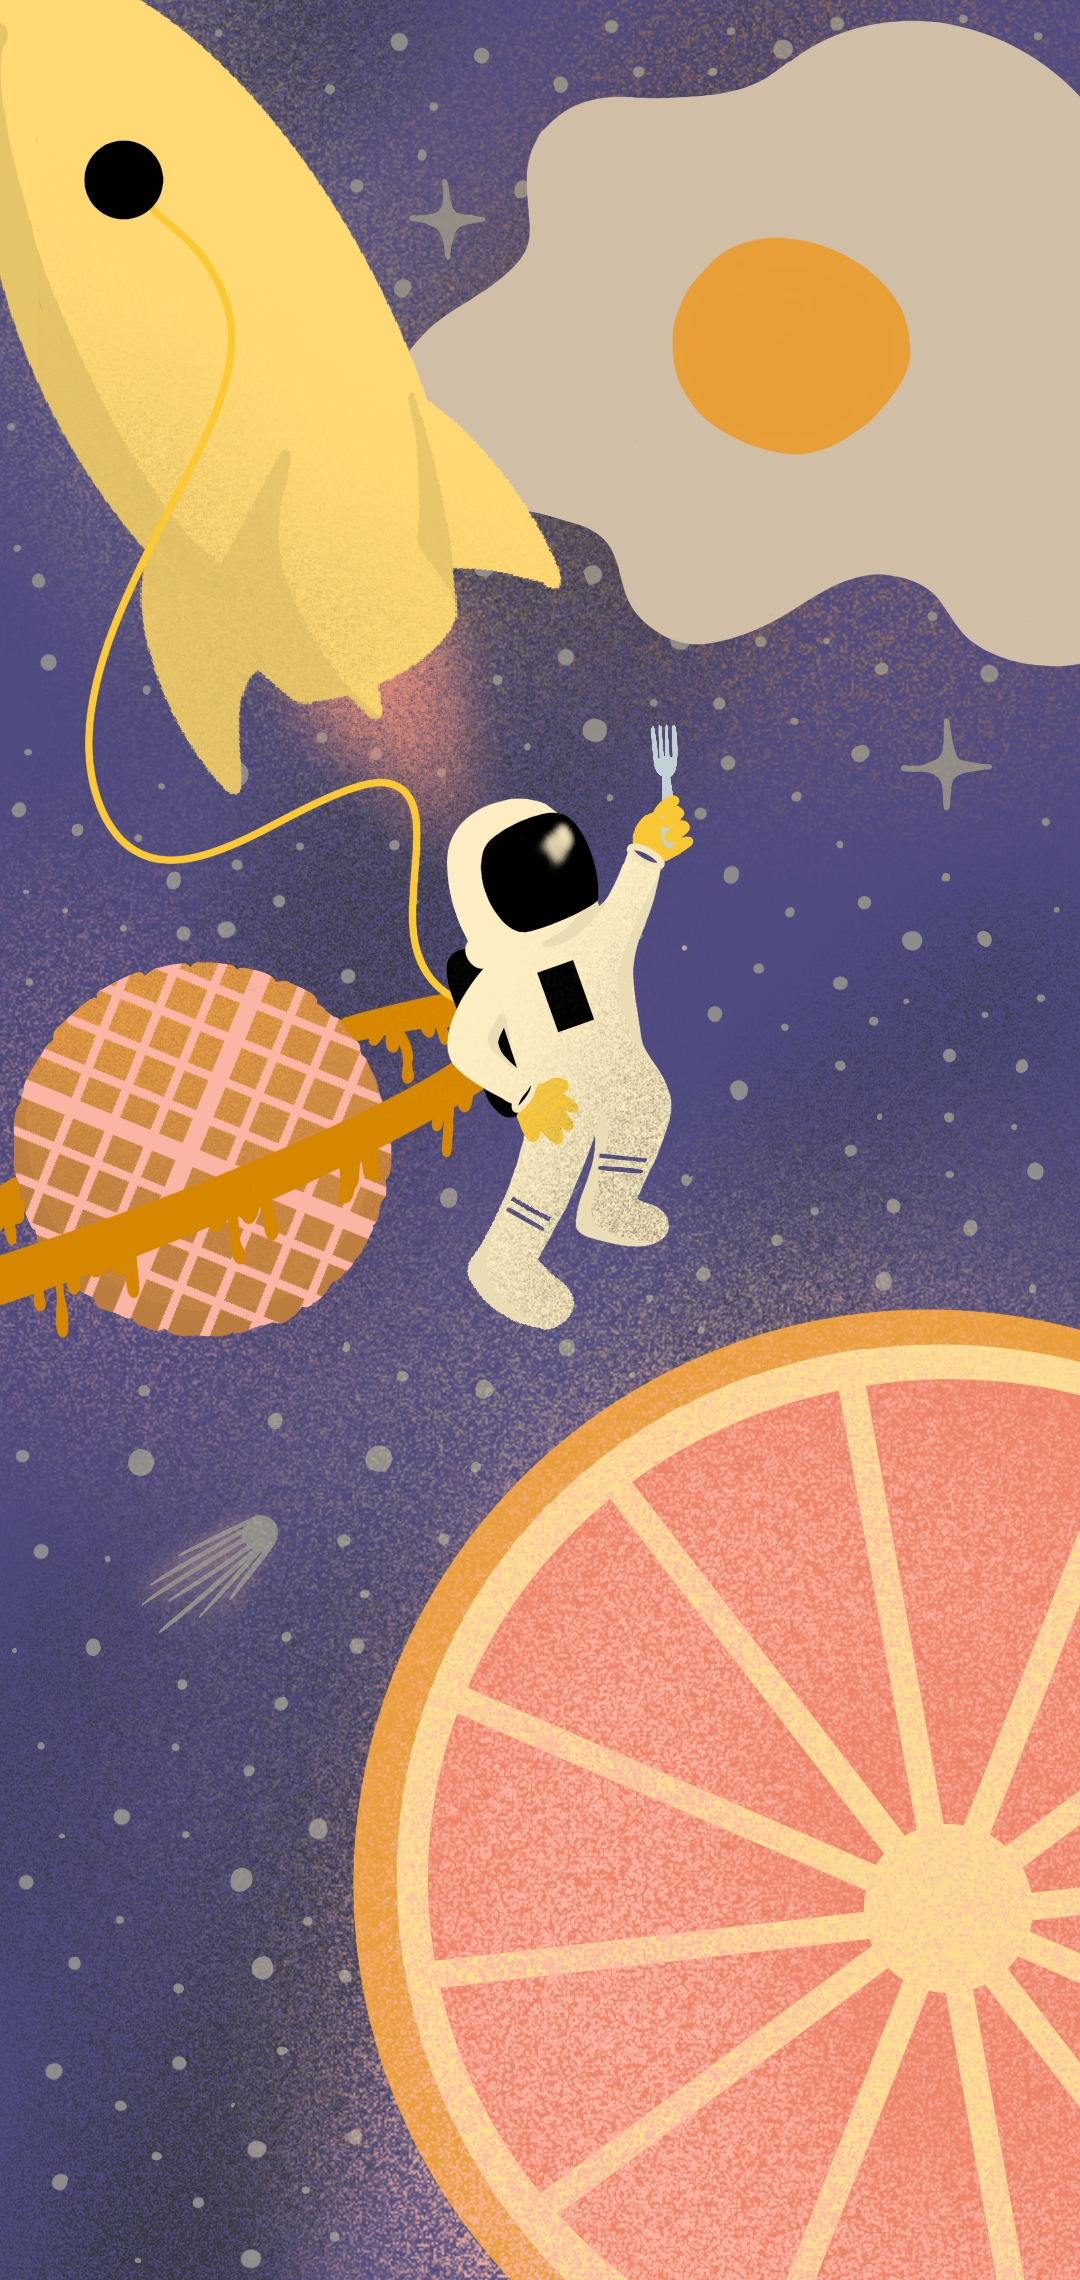 Android Operating System Astronaut Cookies Music Food Bat Cave Vertical 1080x2280